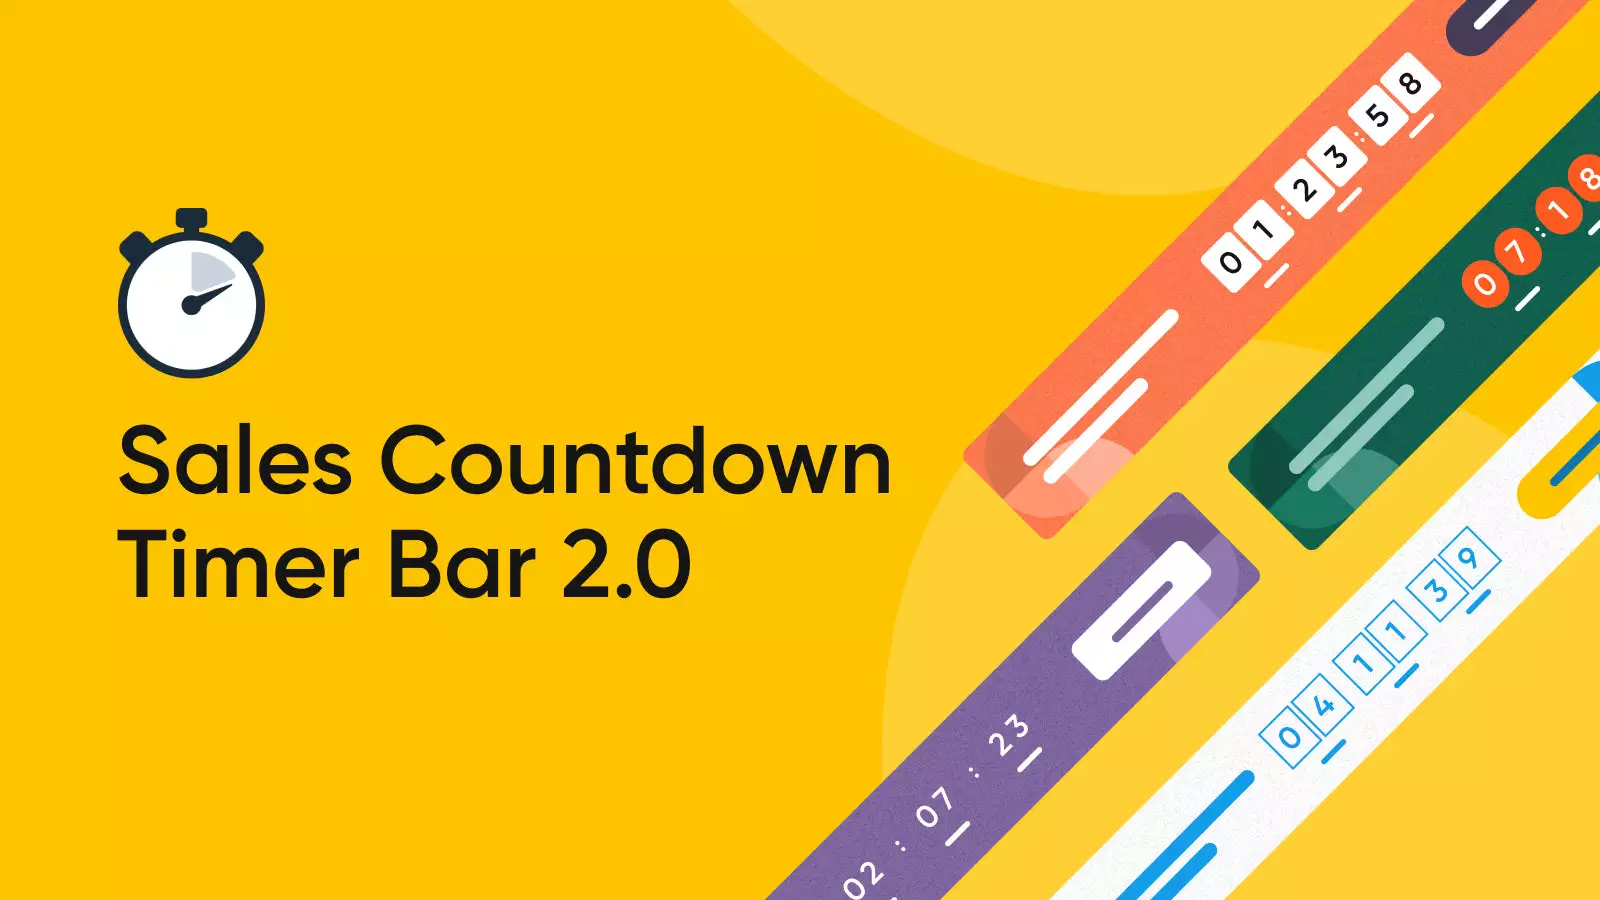 Sales Countdown Timer Bar 2.0 might be simple and straightforward. However, sometimes it doesn't take much to be considered of the top apps on Shopify marketplace